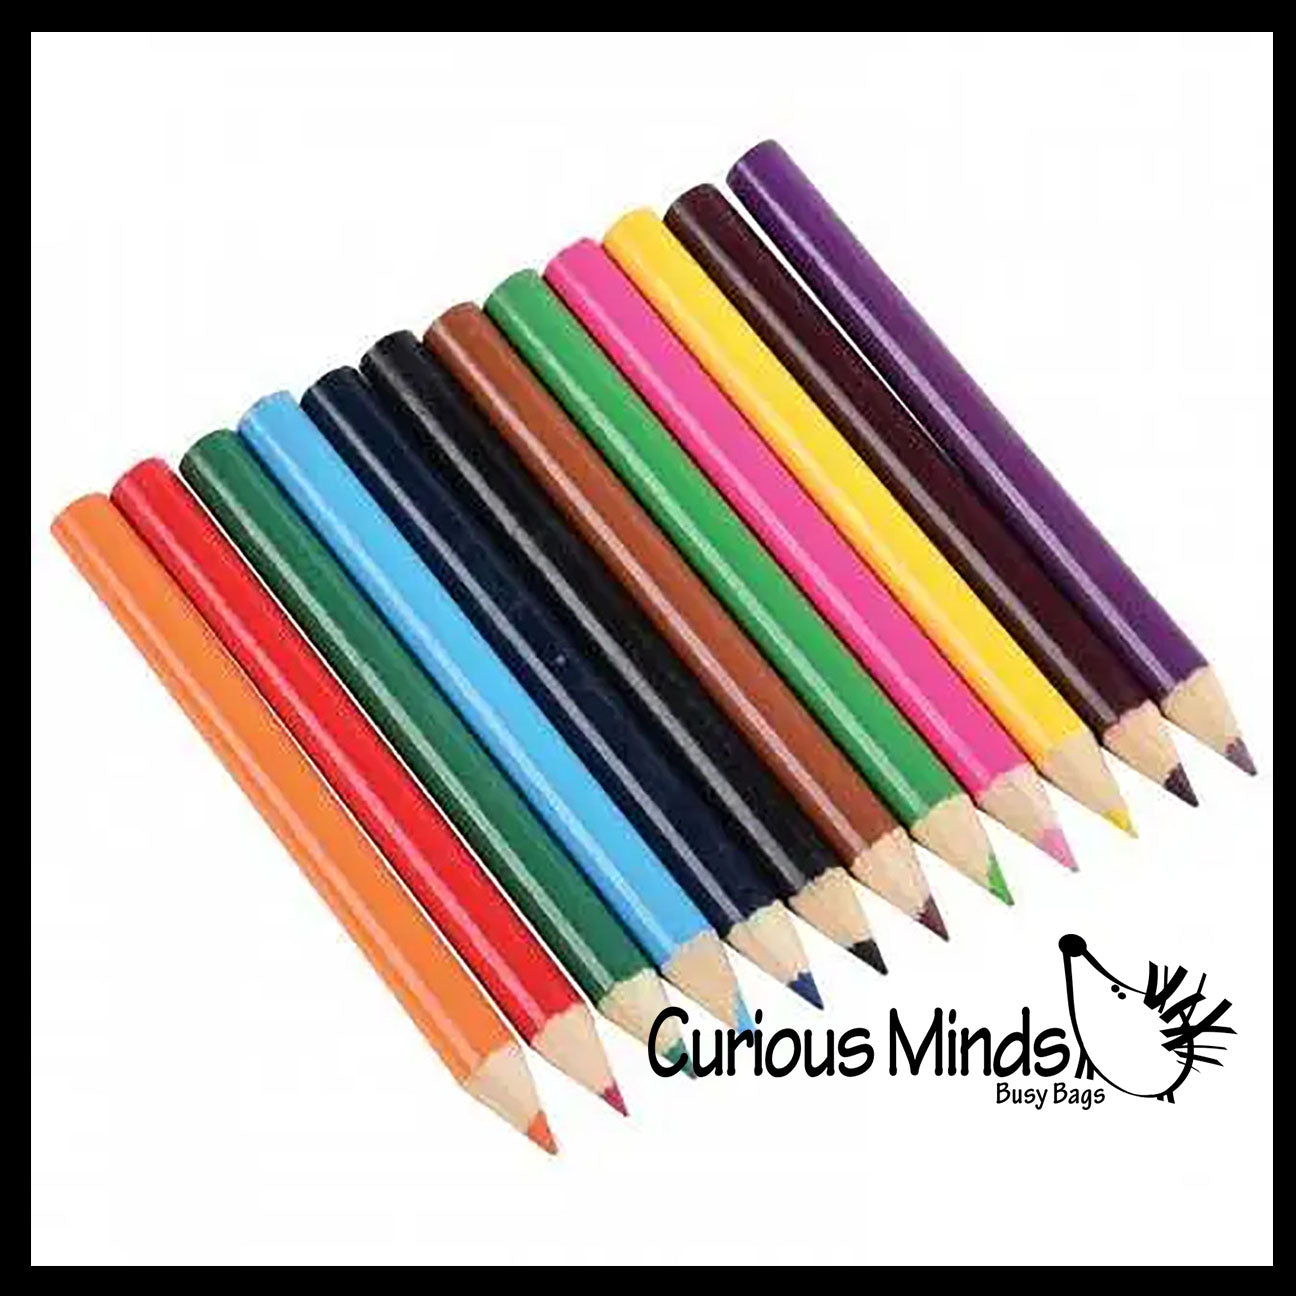 Imperial Colored Multi-color Pencils Mini with Sharpener, Nature Friendly,  18 Count